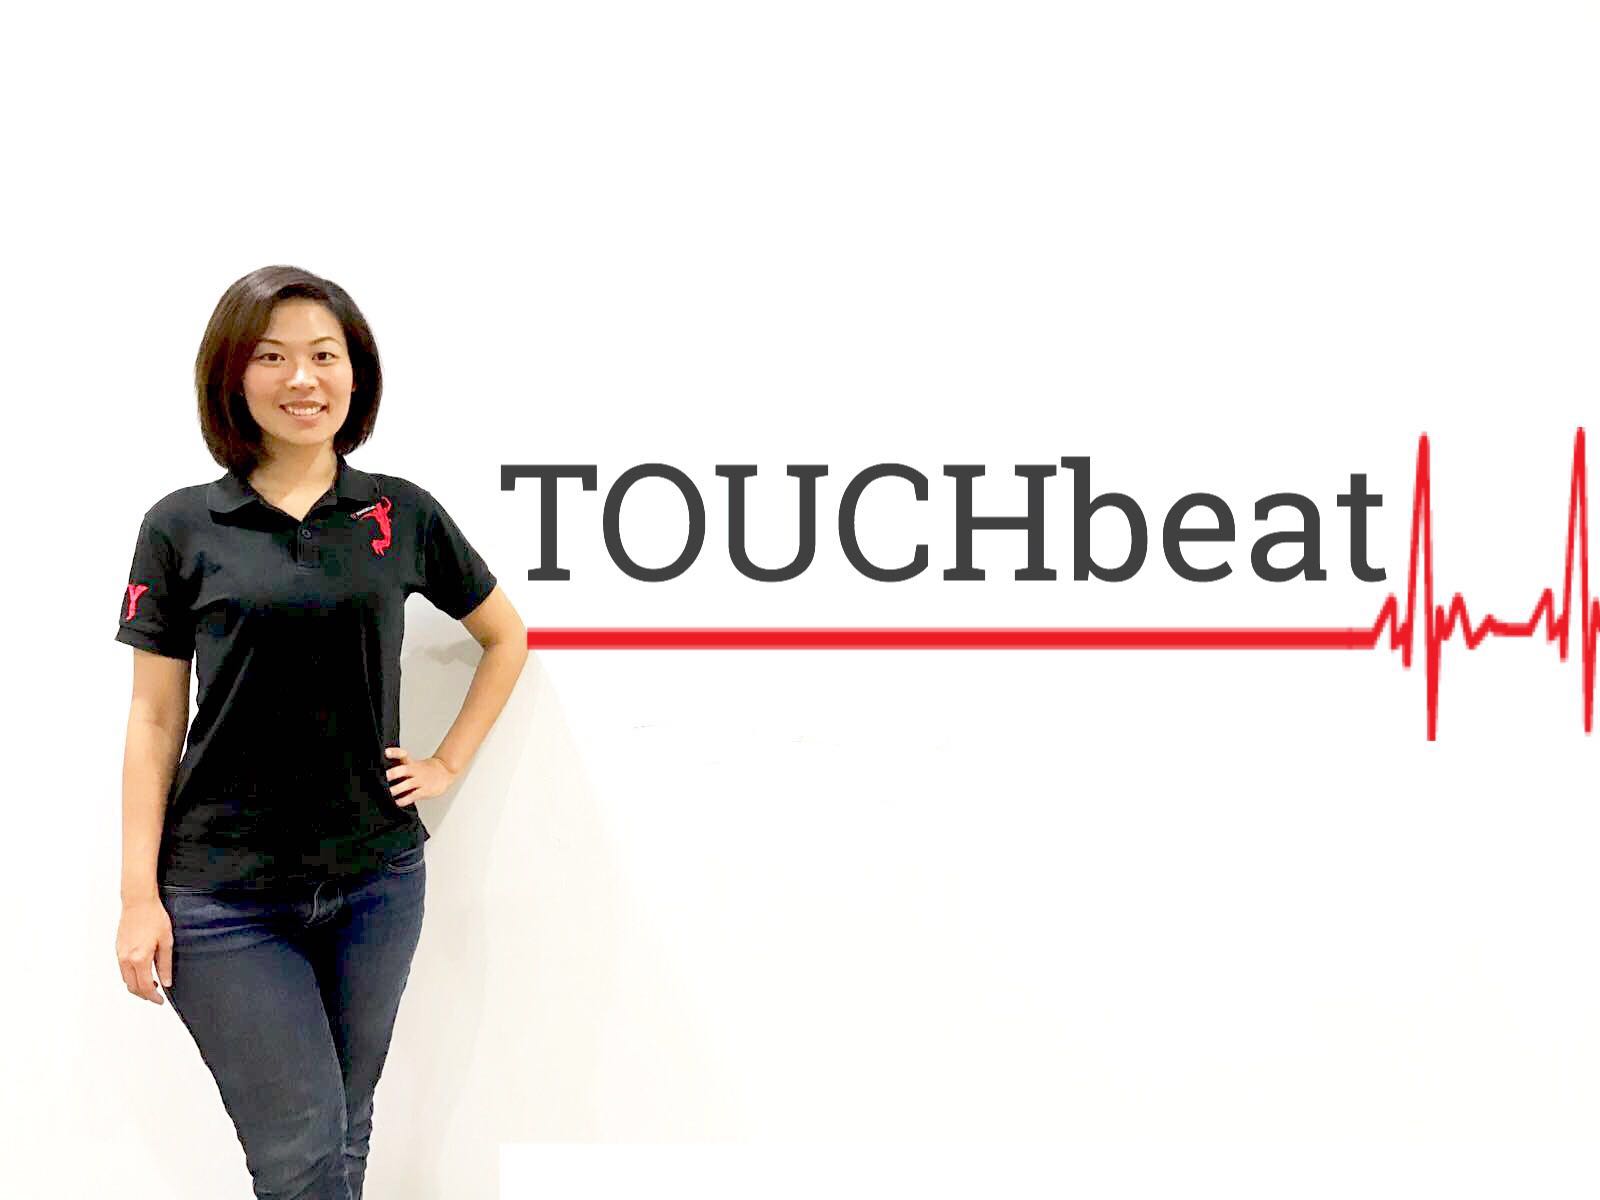 TOUCHBeat: A Passion for People